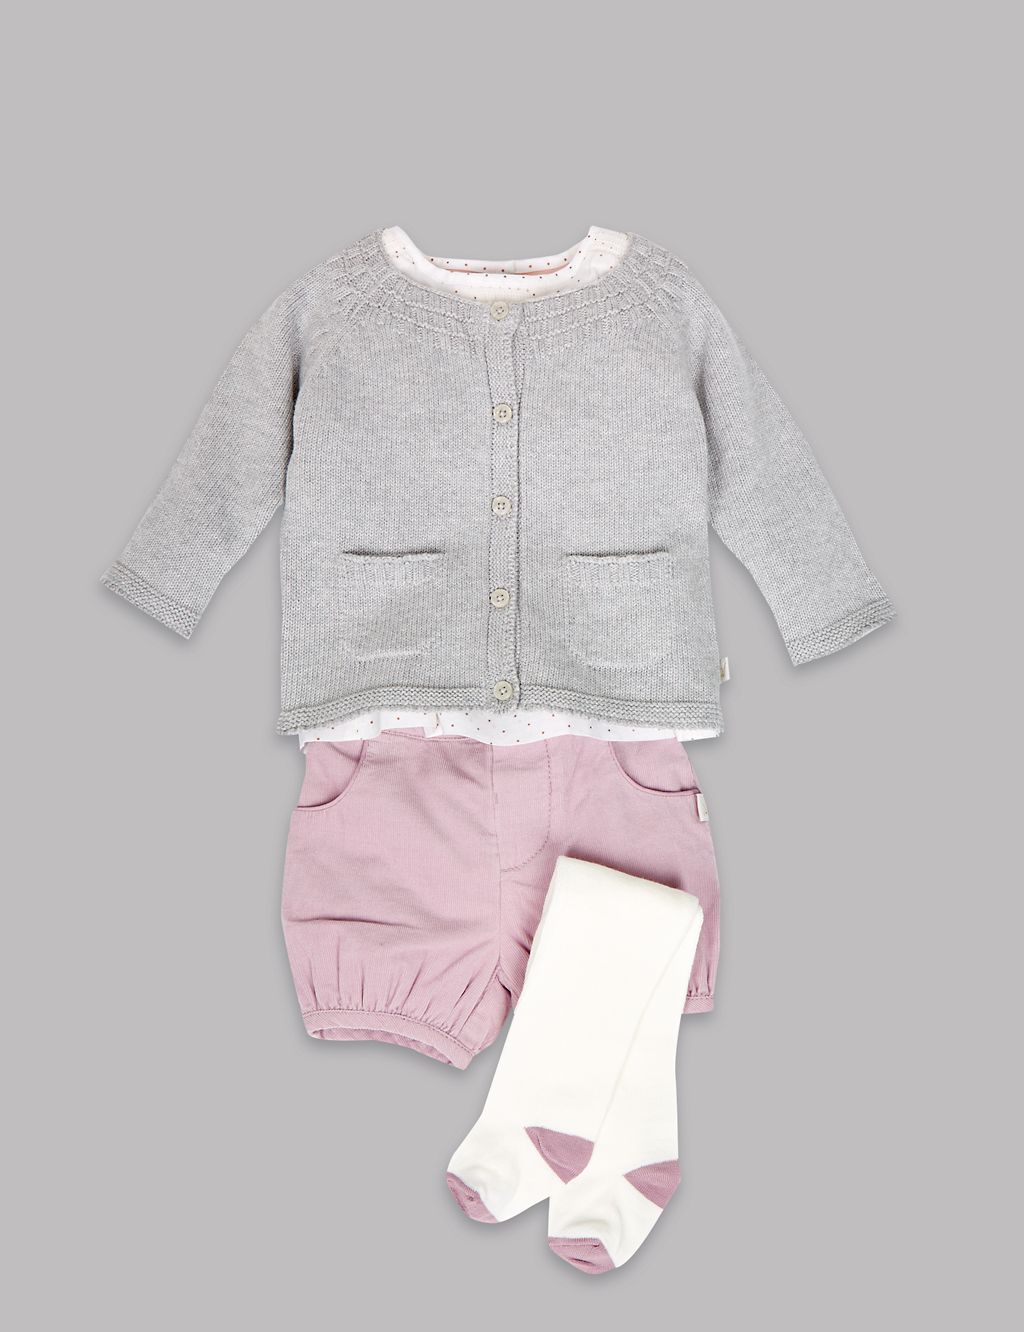 4 Piece Baby Outfit 1 of 9